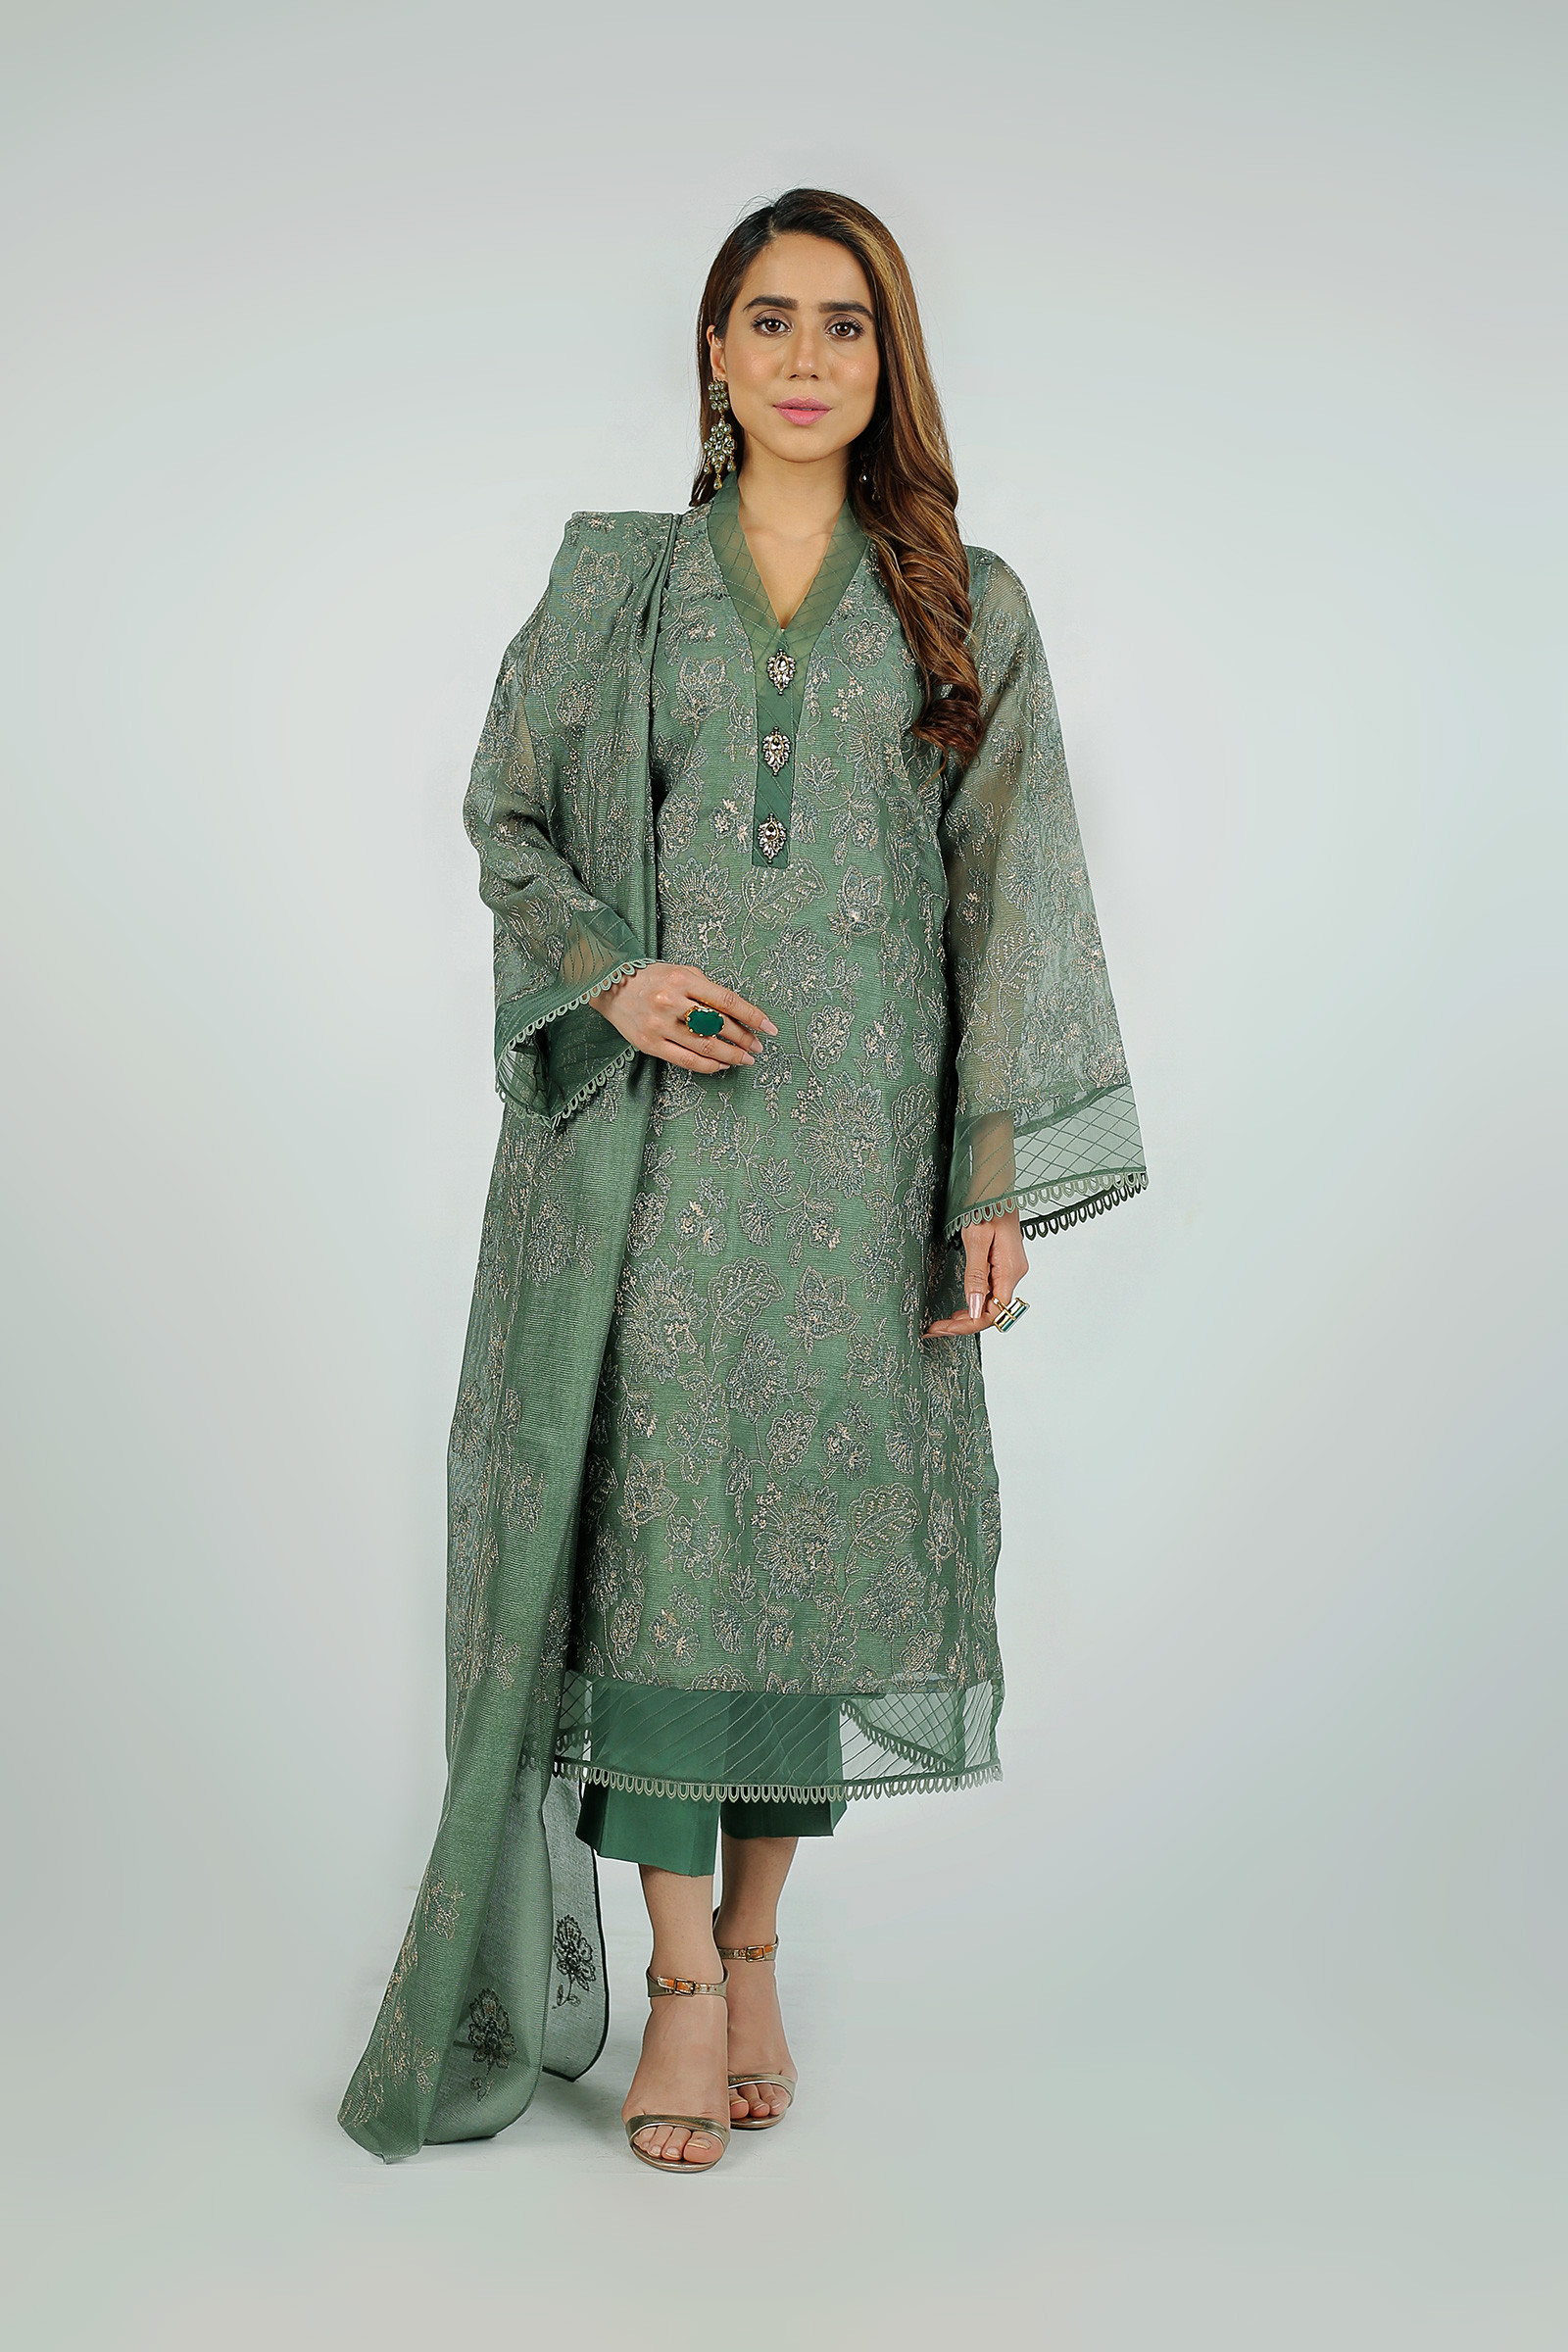 Bareeze Embroidered Net Full Suit